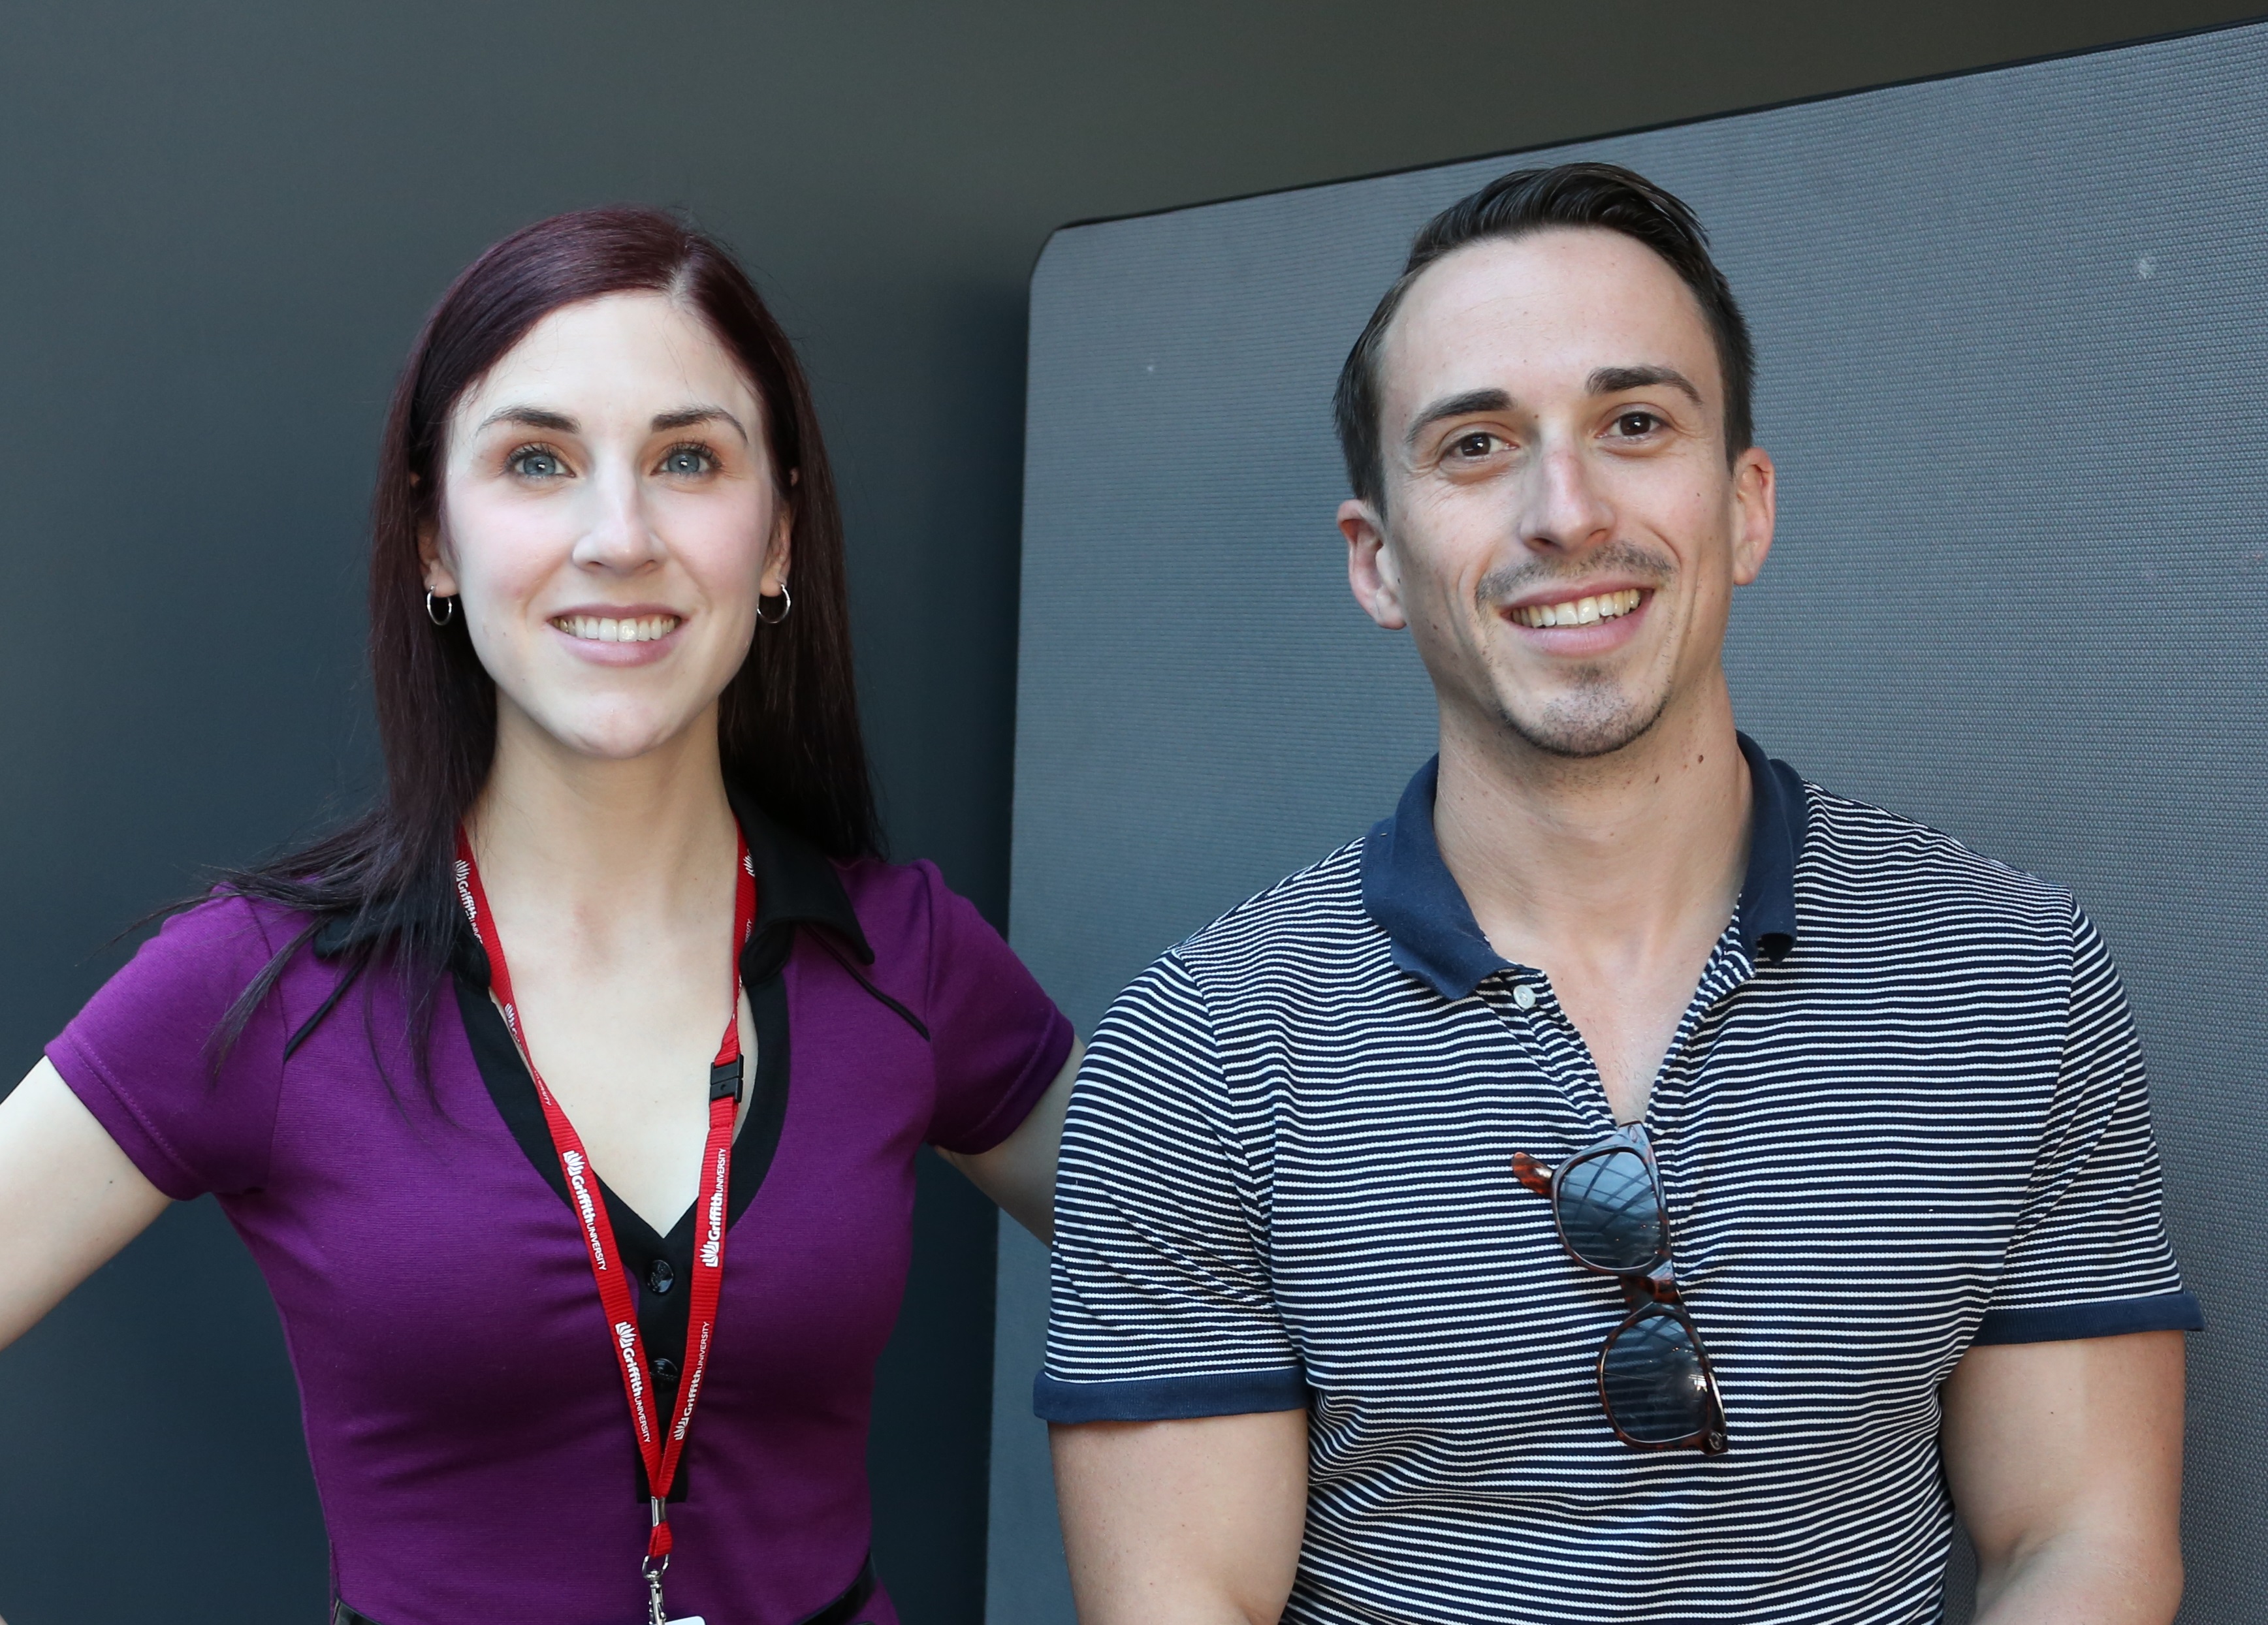 PhD candidate Chelsie Rohrscheib and student forum organiser Michael Todorovic